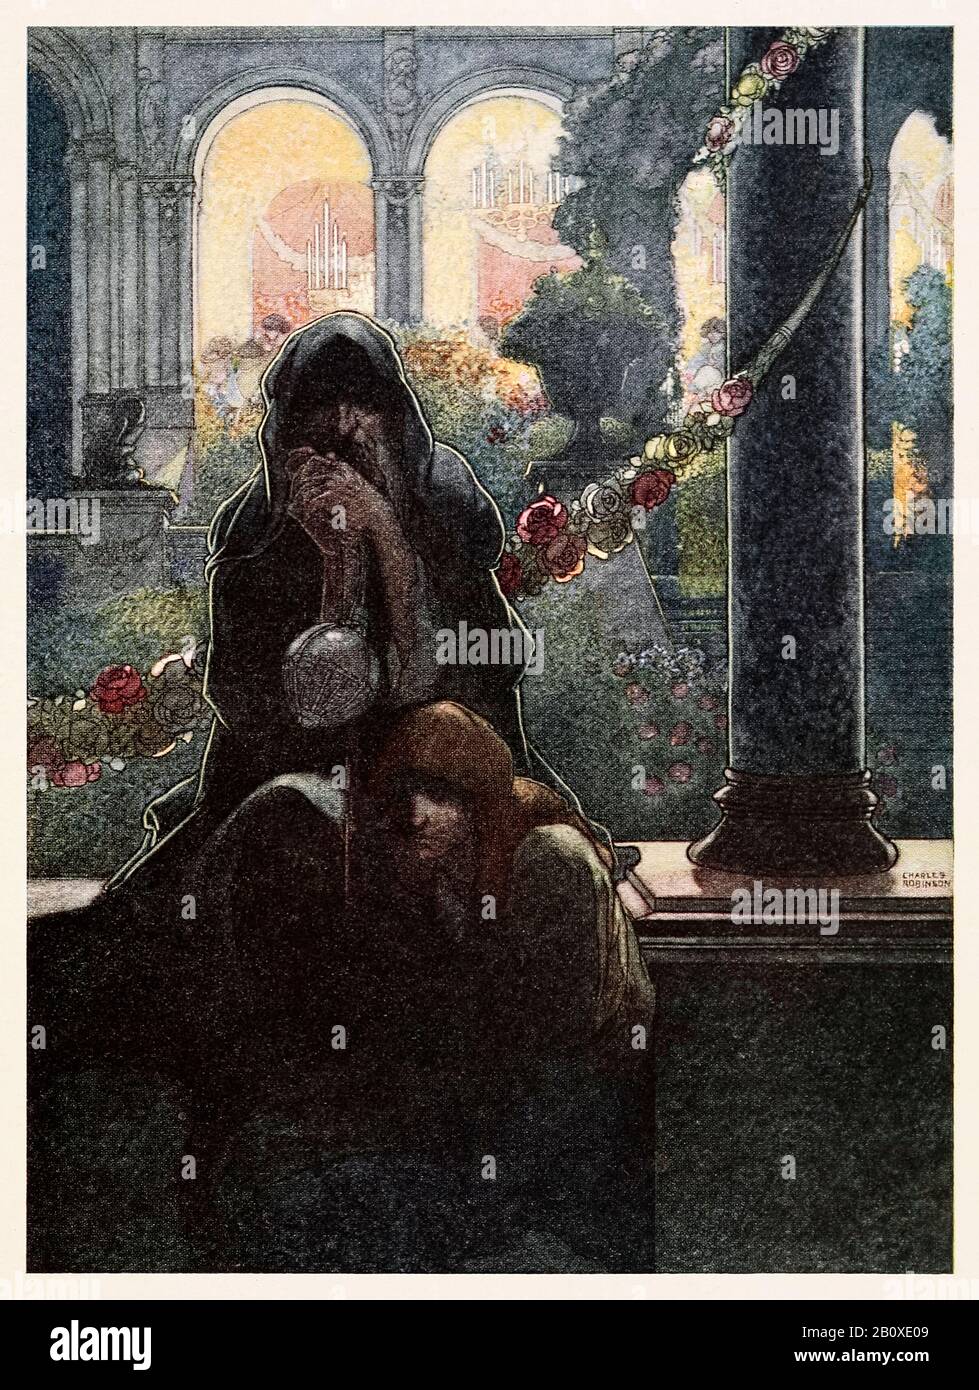 “The rich making merry in their beautiful houses while the beggars were sitting at the gate” from The Happy Prince and Other Tales by Oscar Wilde (1854-1900) illustrated by Charles Robinson (1870-1937). See more information below. Stock Photo